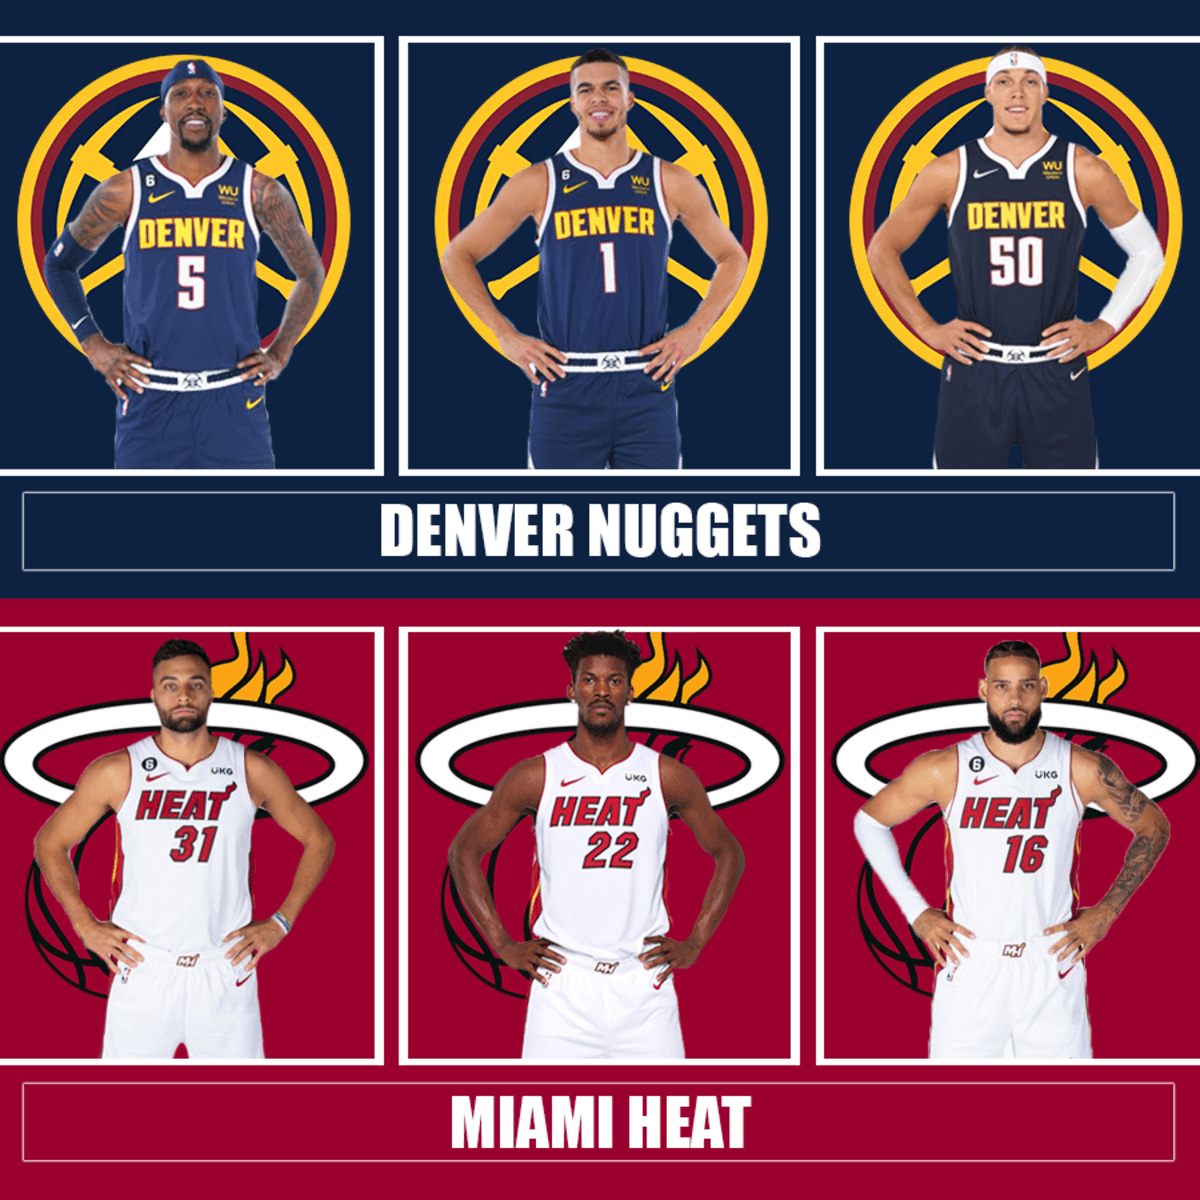 The Denver Nuggets have defeated the Miami Heat to become the 2023